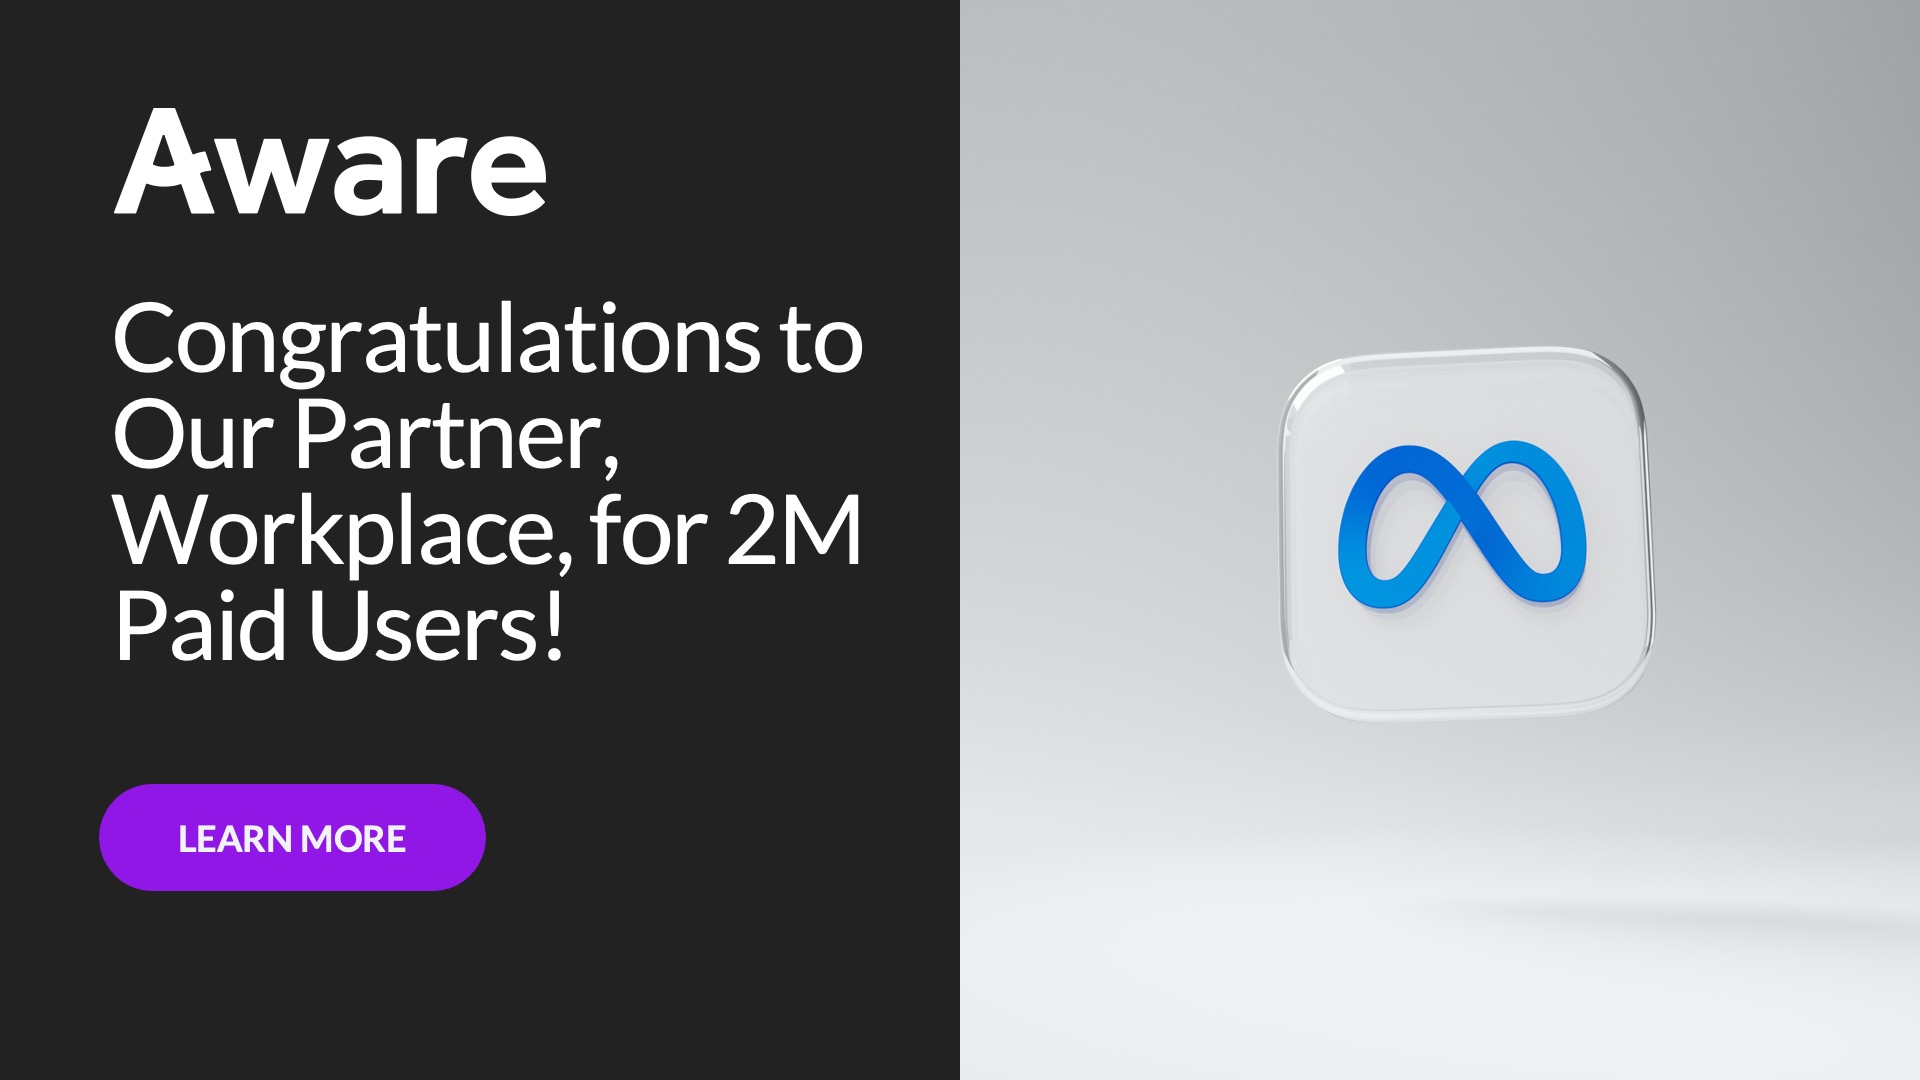 Congratulations to Our Partner, Workplace, for 2M Paid Users!